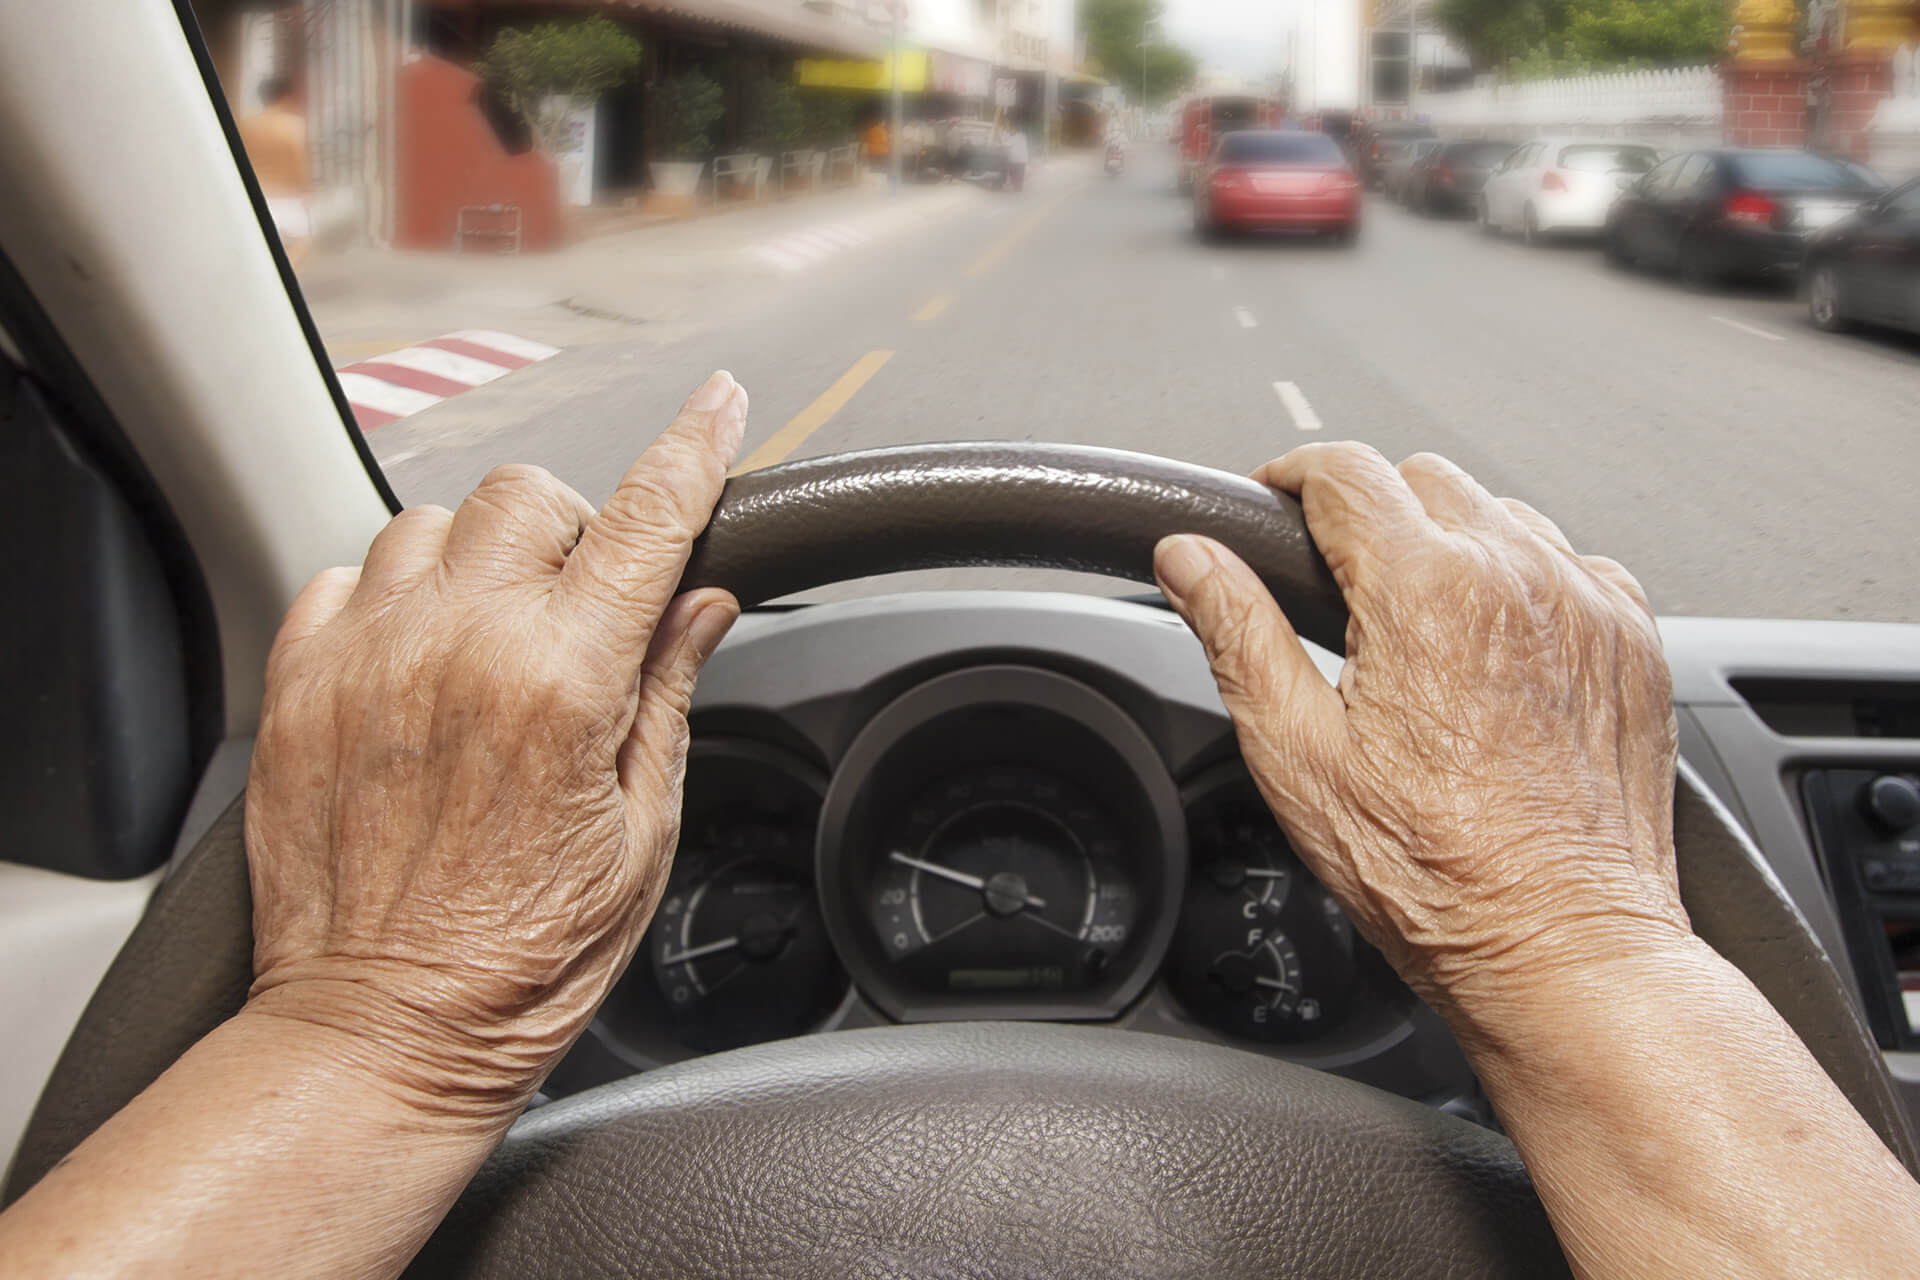 How to Tell Your Senior Parent It’s Time to Stop Driving